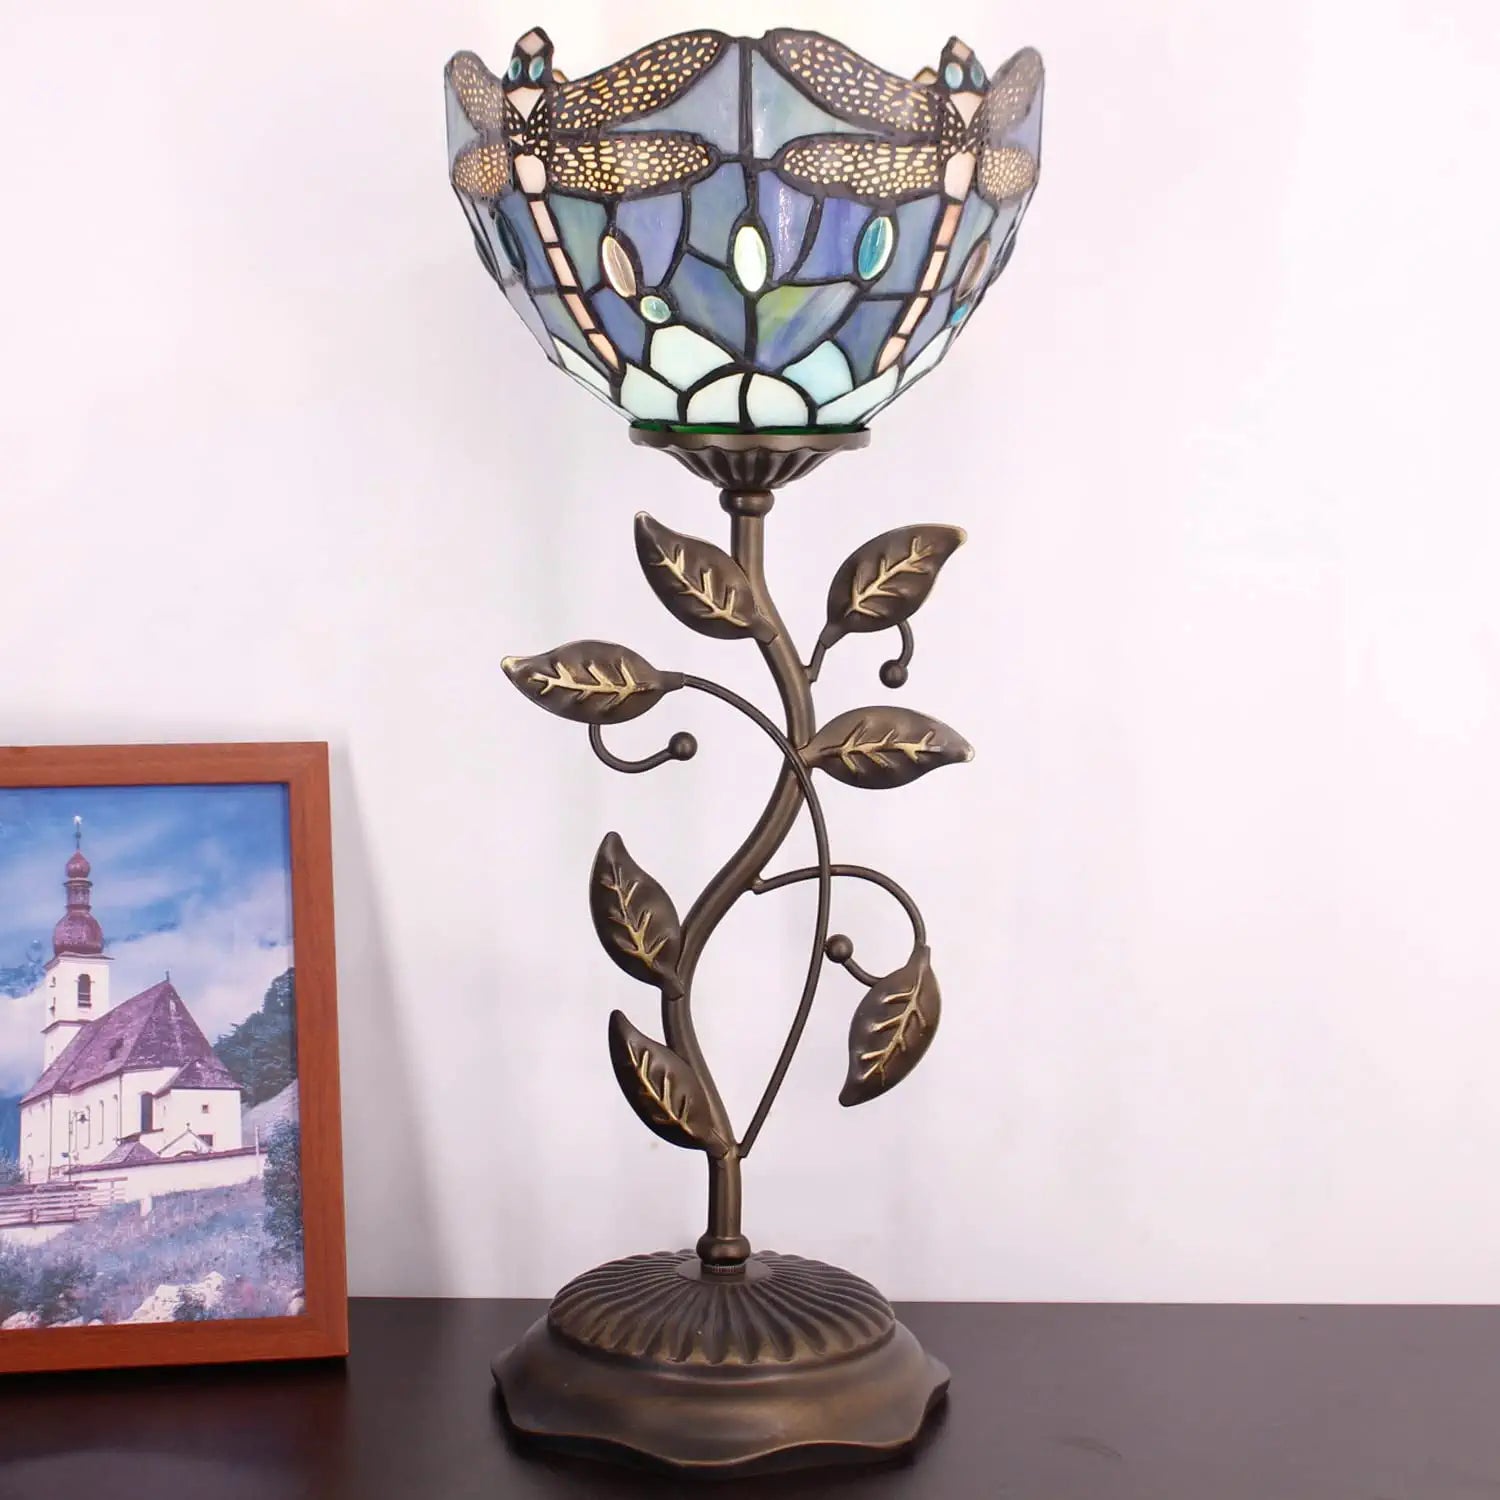 WERFACTORY Small Tiffany Table Lamp 8" Sea Blue Stained Glass Dragonfly Style Shade 19" Tall Antique Vintage Metal Leaf Base Mini Bedside Accent Desk Torchiere Uplight